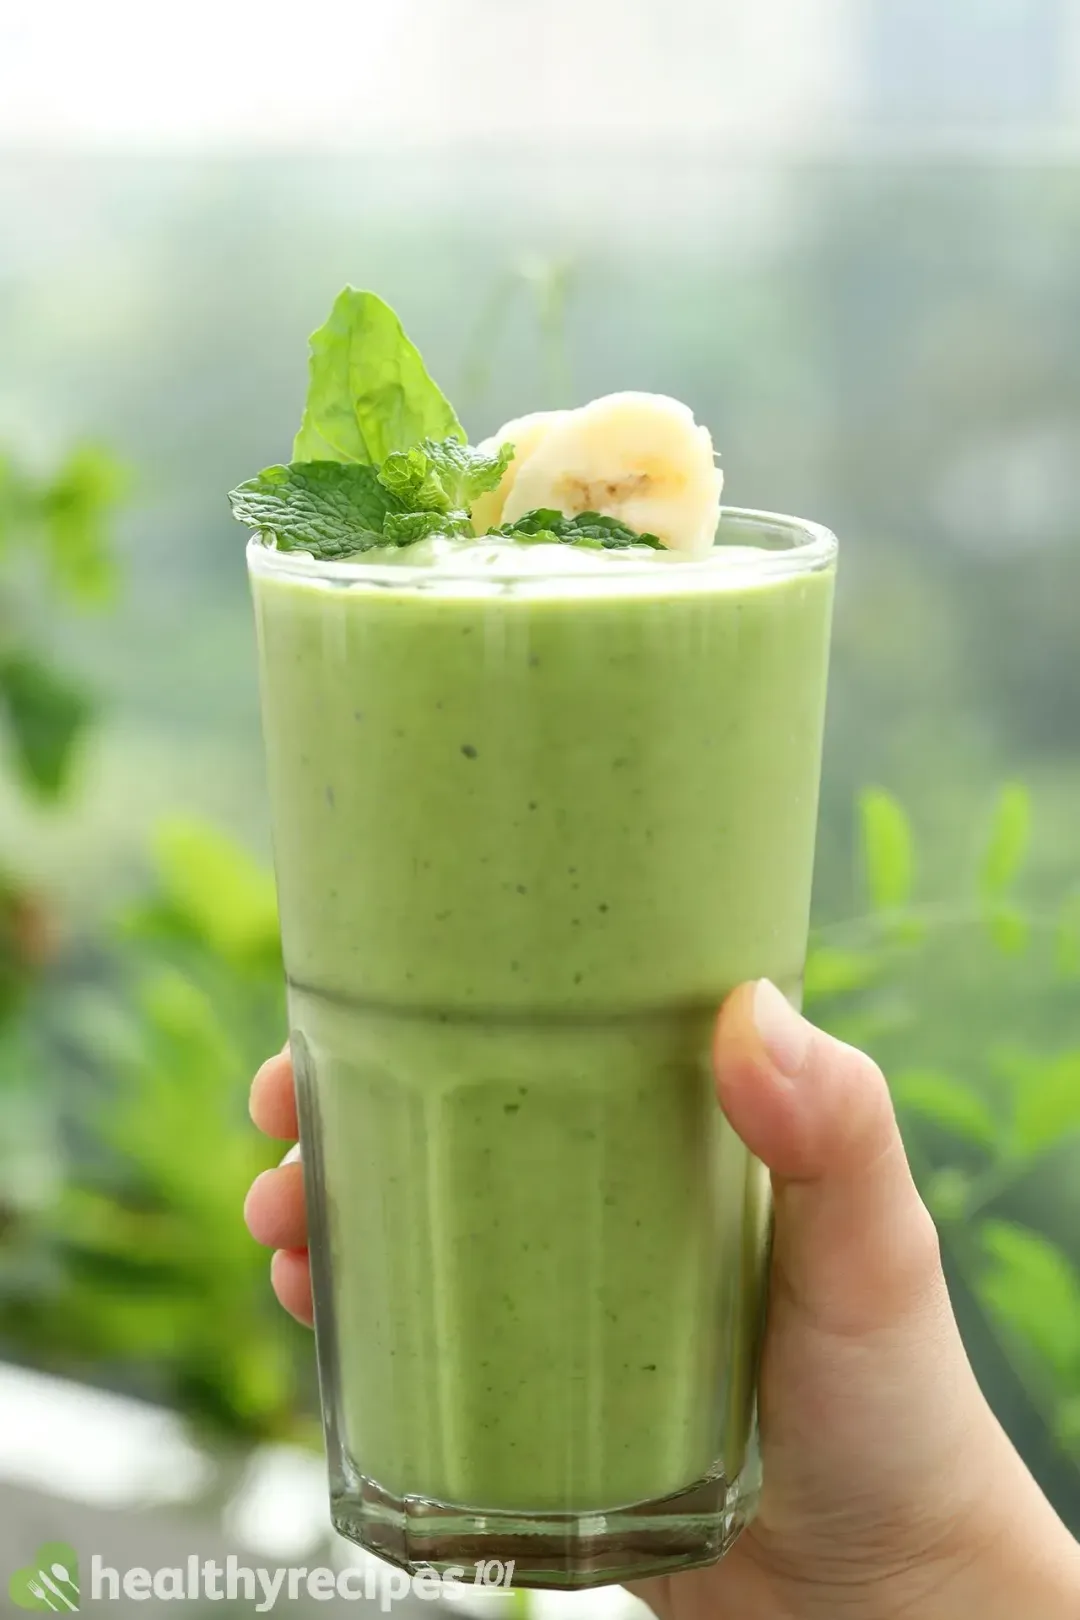 Is This Avocado Spinach Smoothie Recipe Healthy